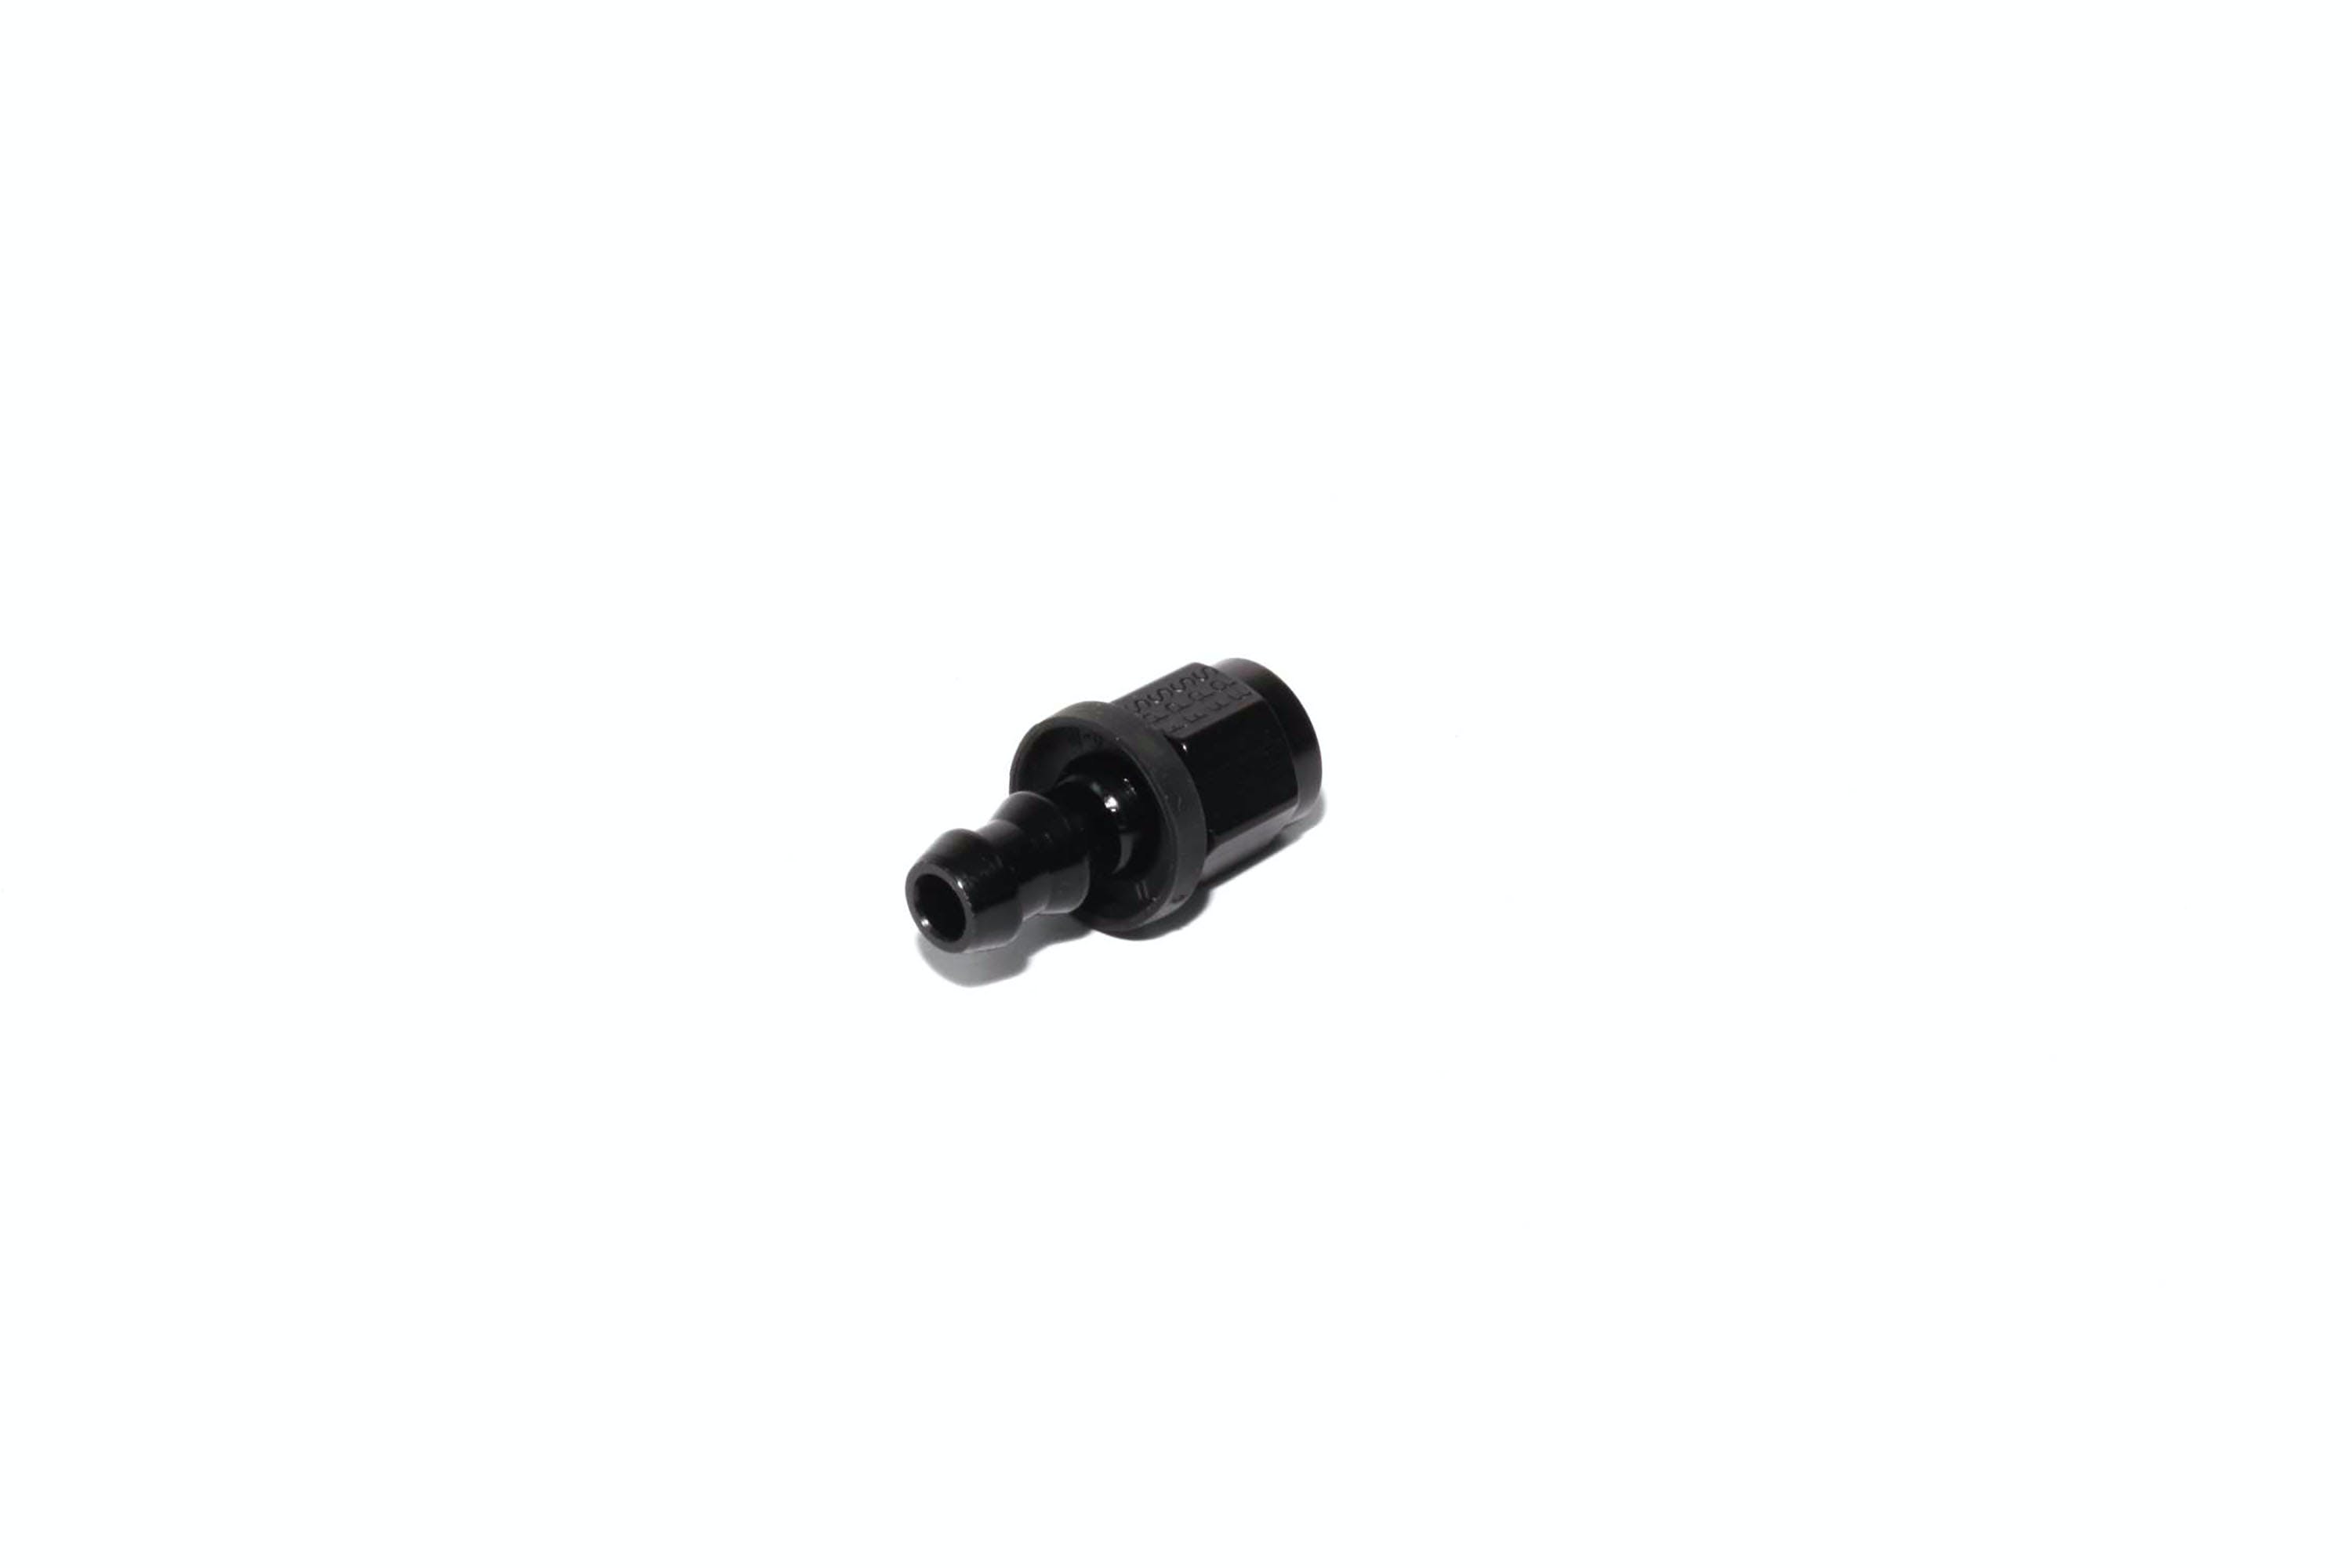 FAST - Fuel Air Spark Technology 30275-1 6AN Female to Straight Push-Lock Fitting